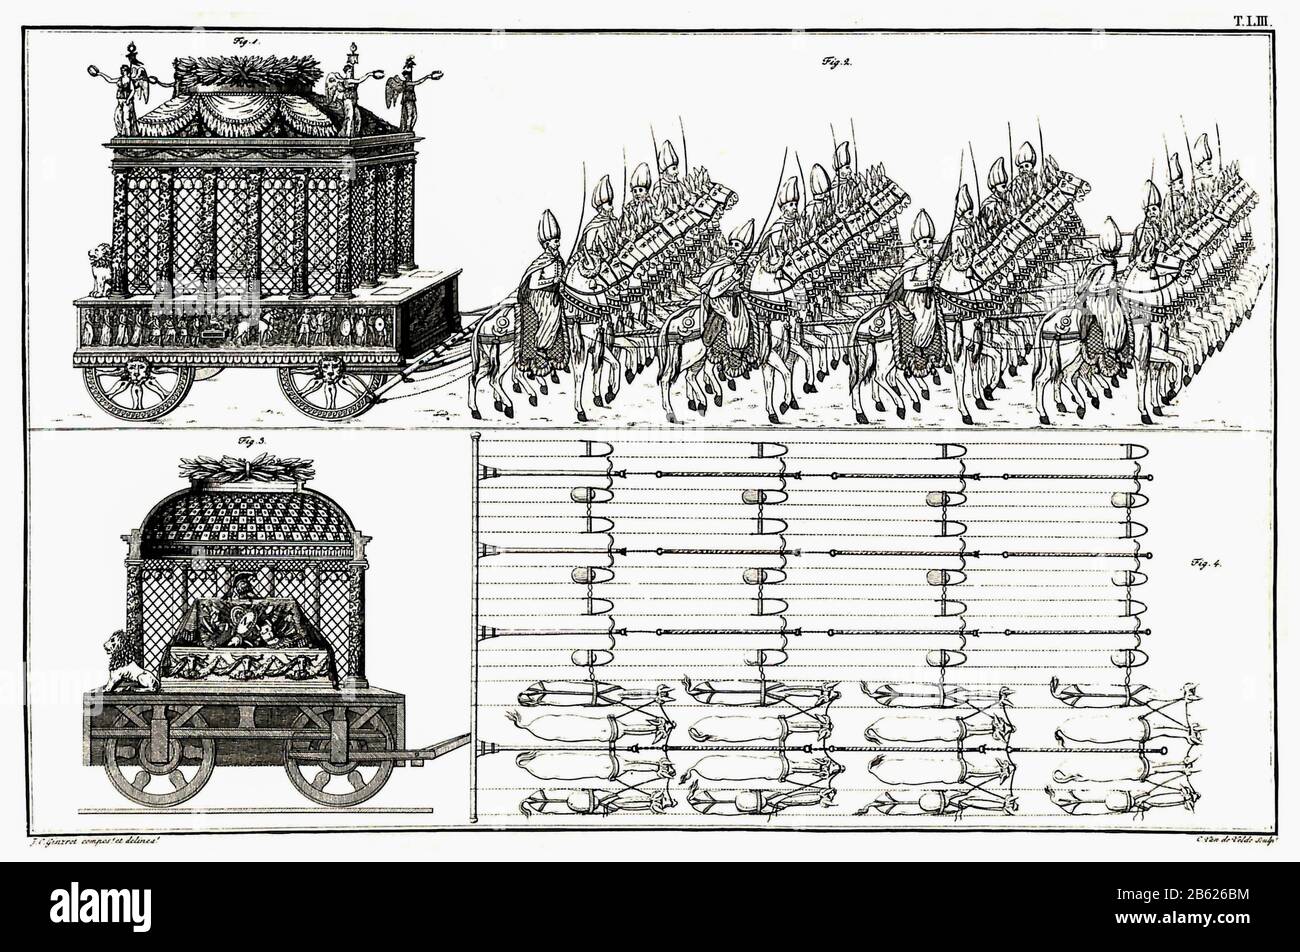 Funeral wagon of Alexander the Great, illustration by Johann Christian Ginzrot, 1817 Stock Photo